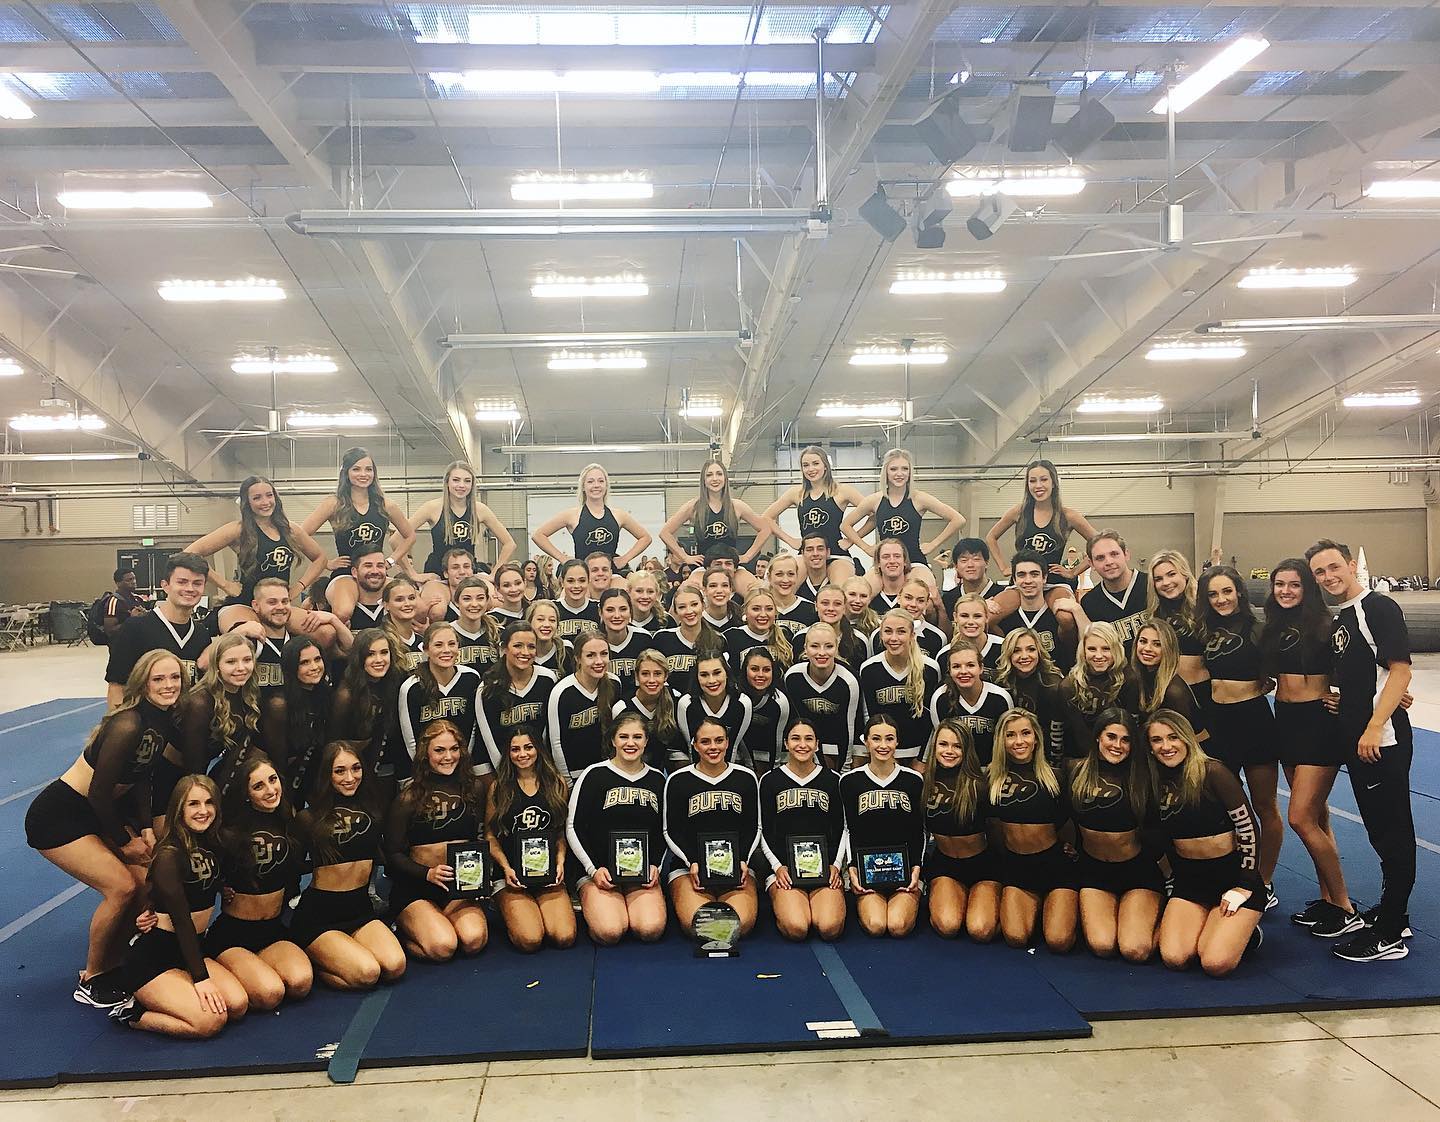 Women's cheer team soaring to Shanghai, nationals and beyond